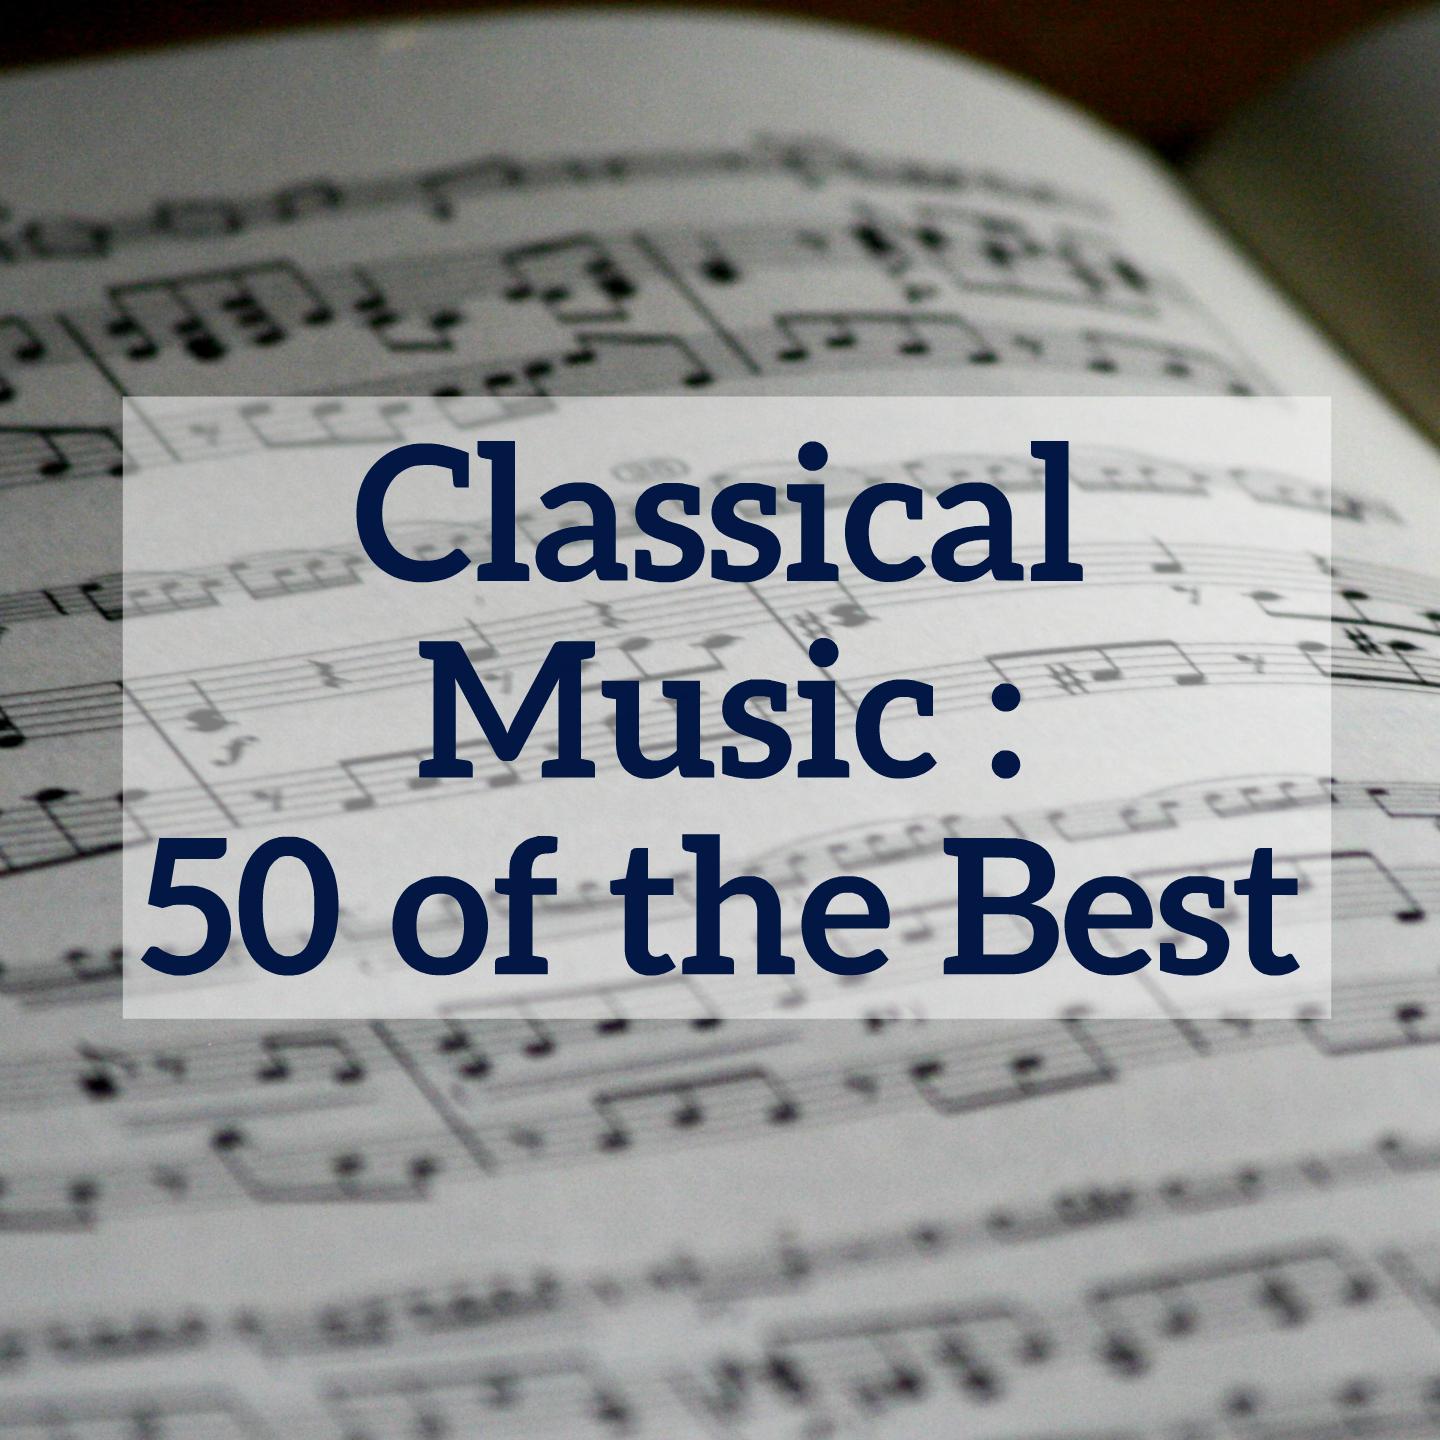 Classical Music : 50 of the Best